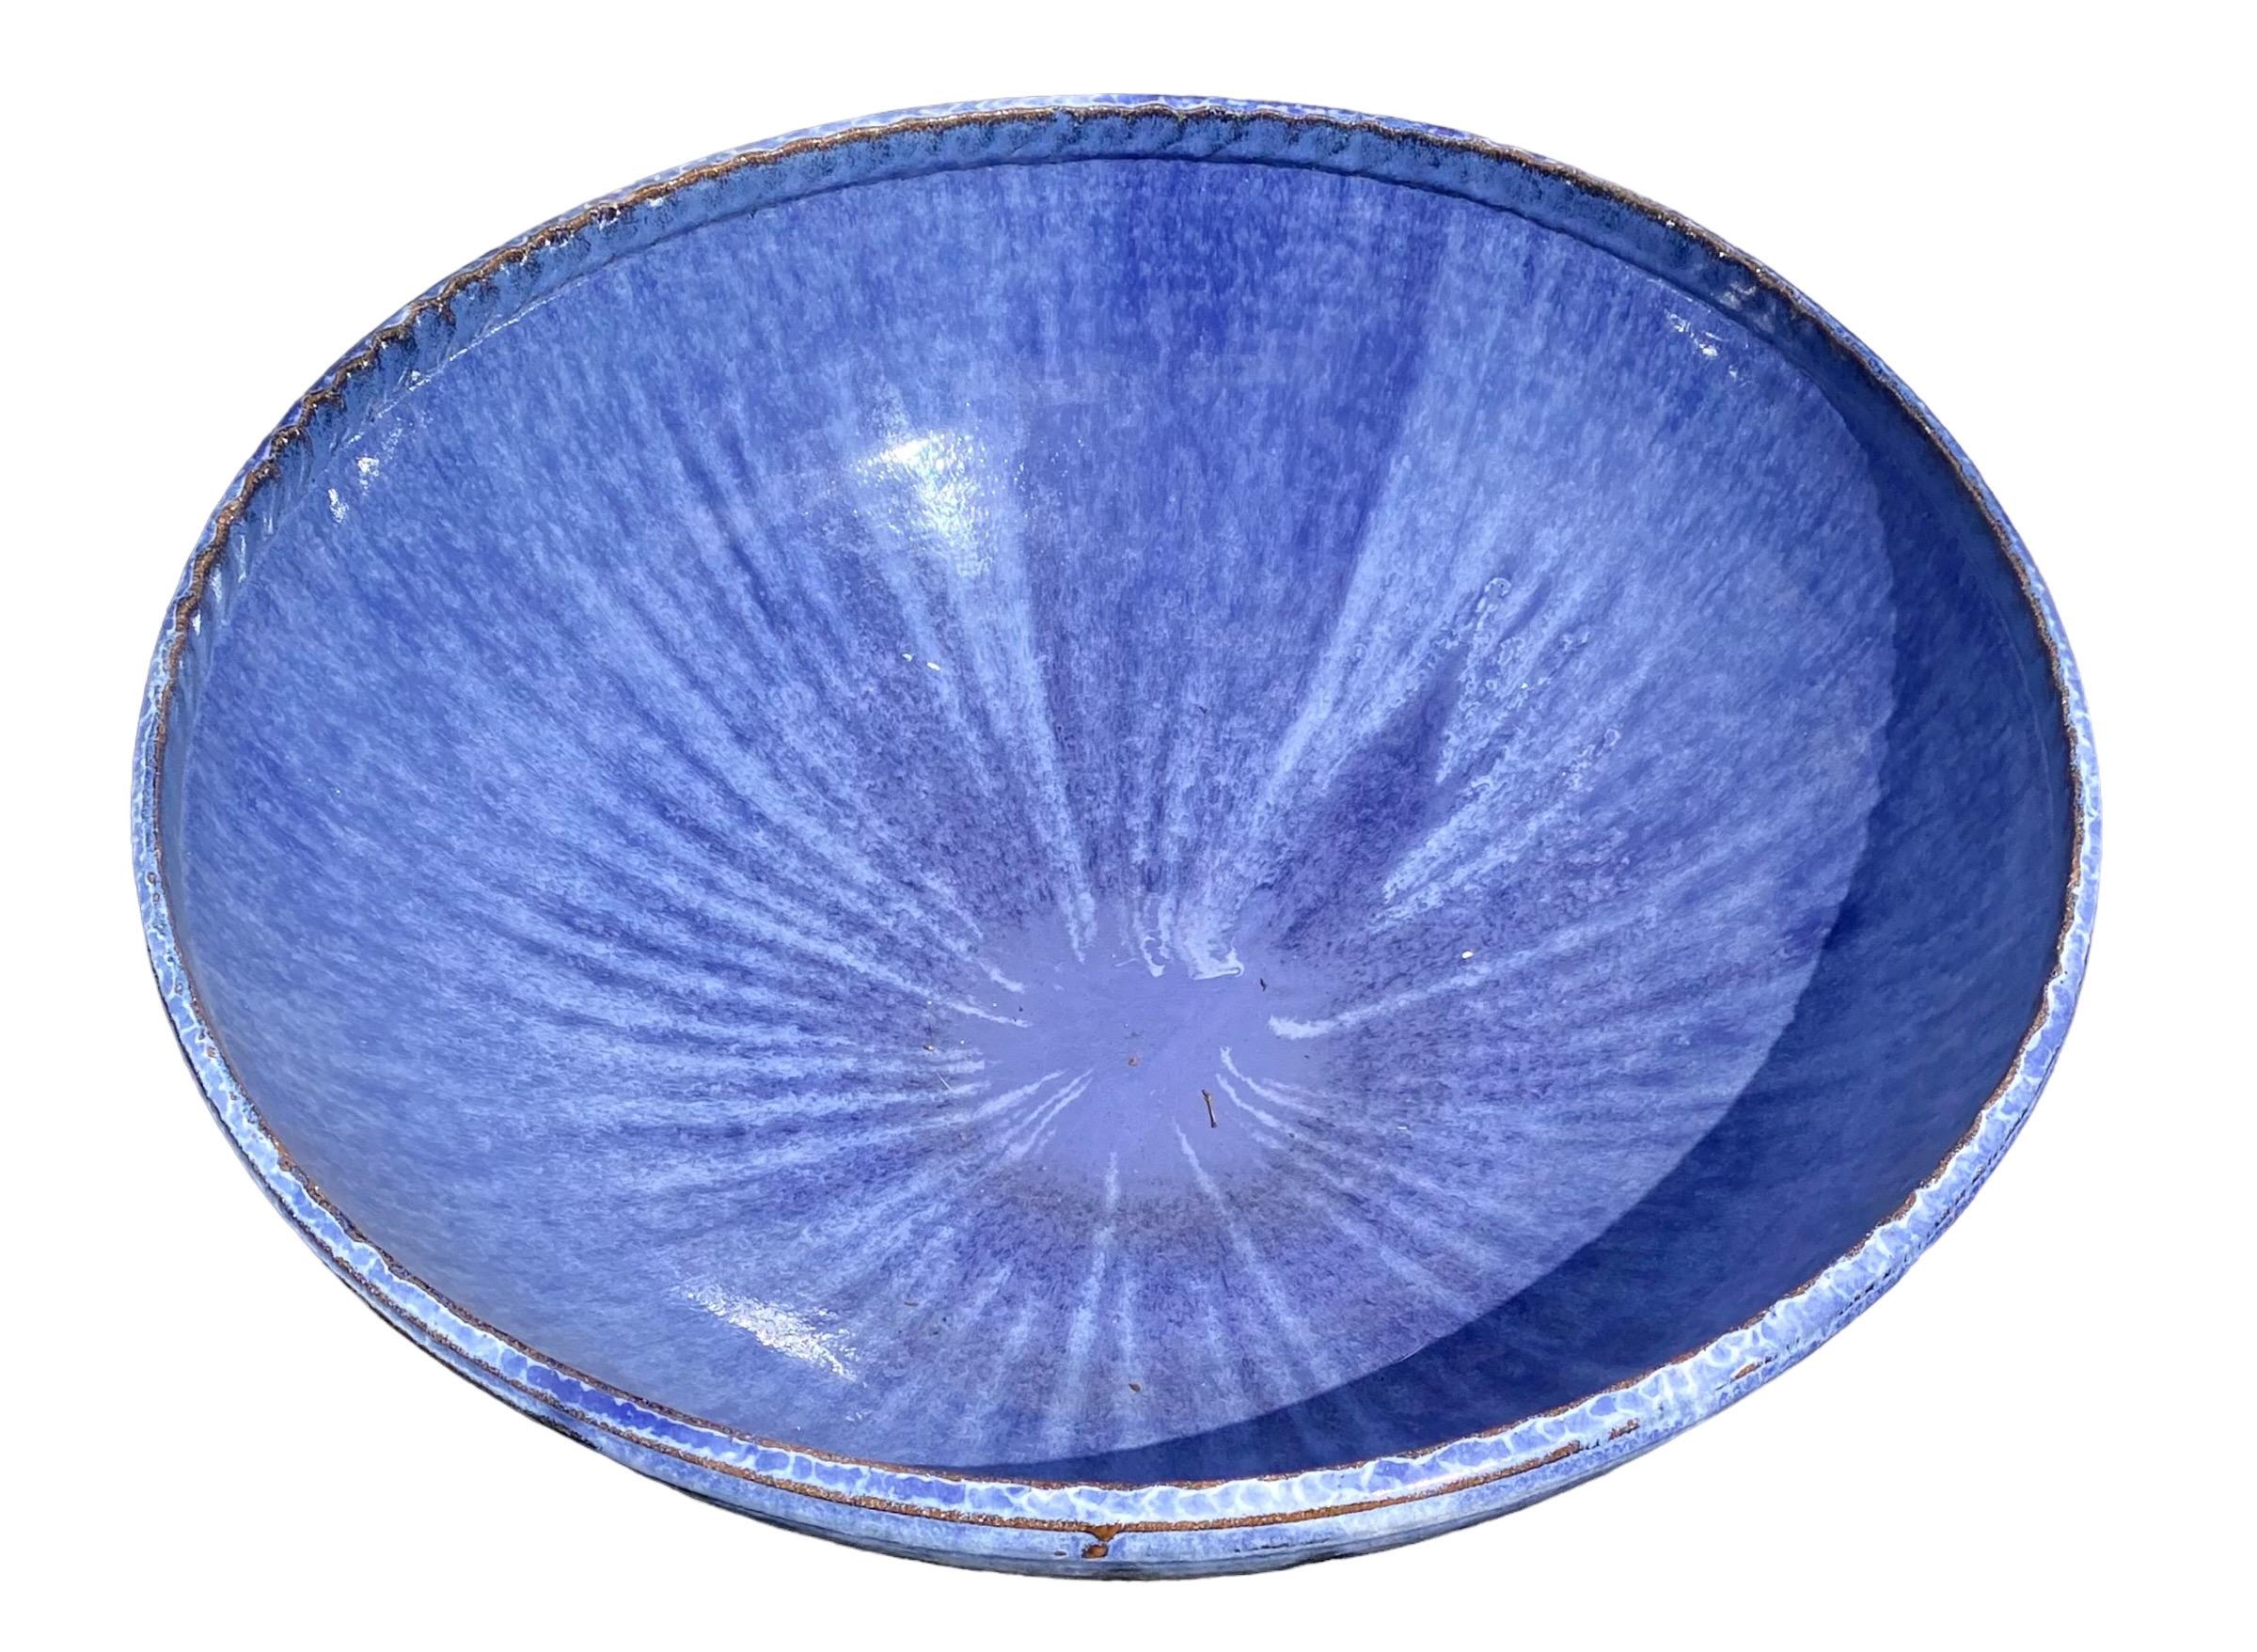 A stunning and monumental hand thrown and glazed terracotta bowl in shades of cerulean and lapis blues, hand made in the New Orleans studio of Alex and Cindy Williams.

Award-winning artisans Alex and Cindy Williams have created hand-crafted pottery